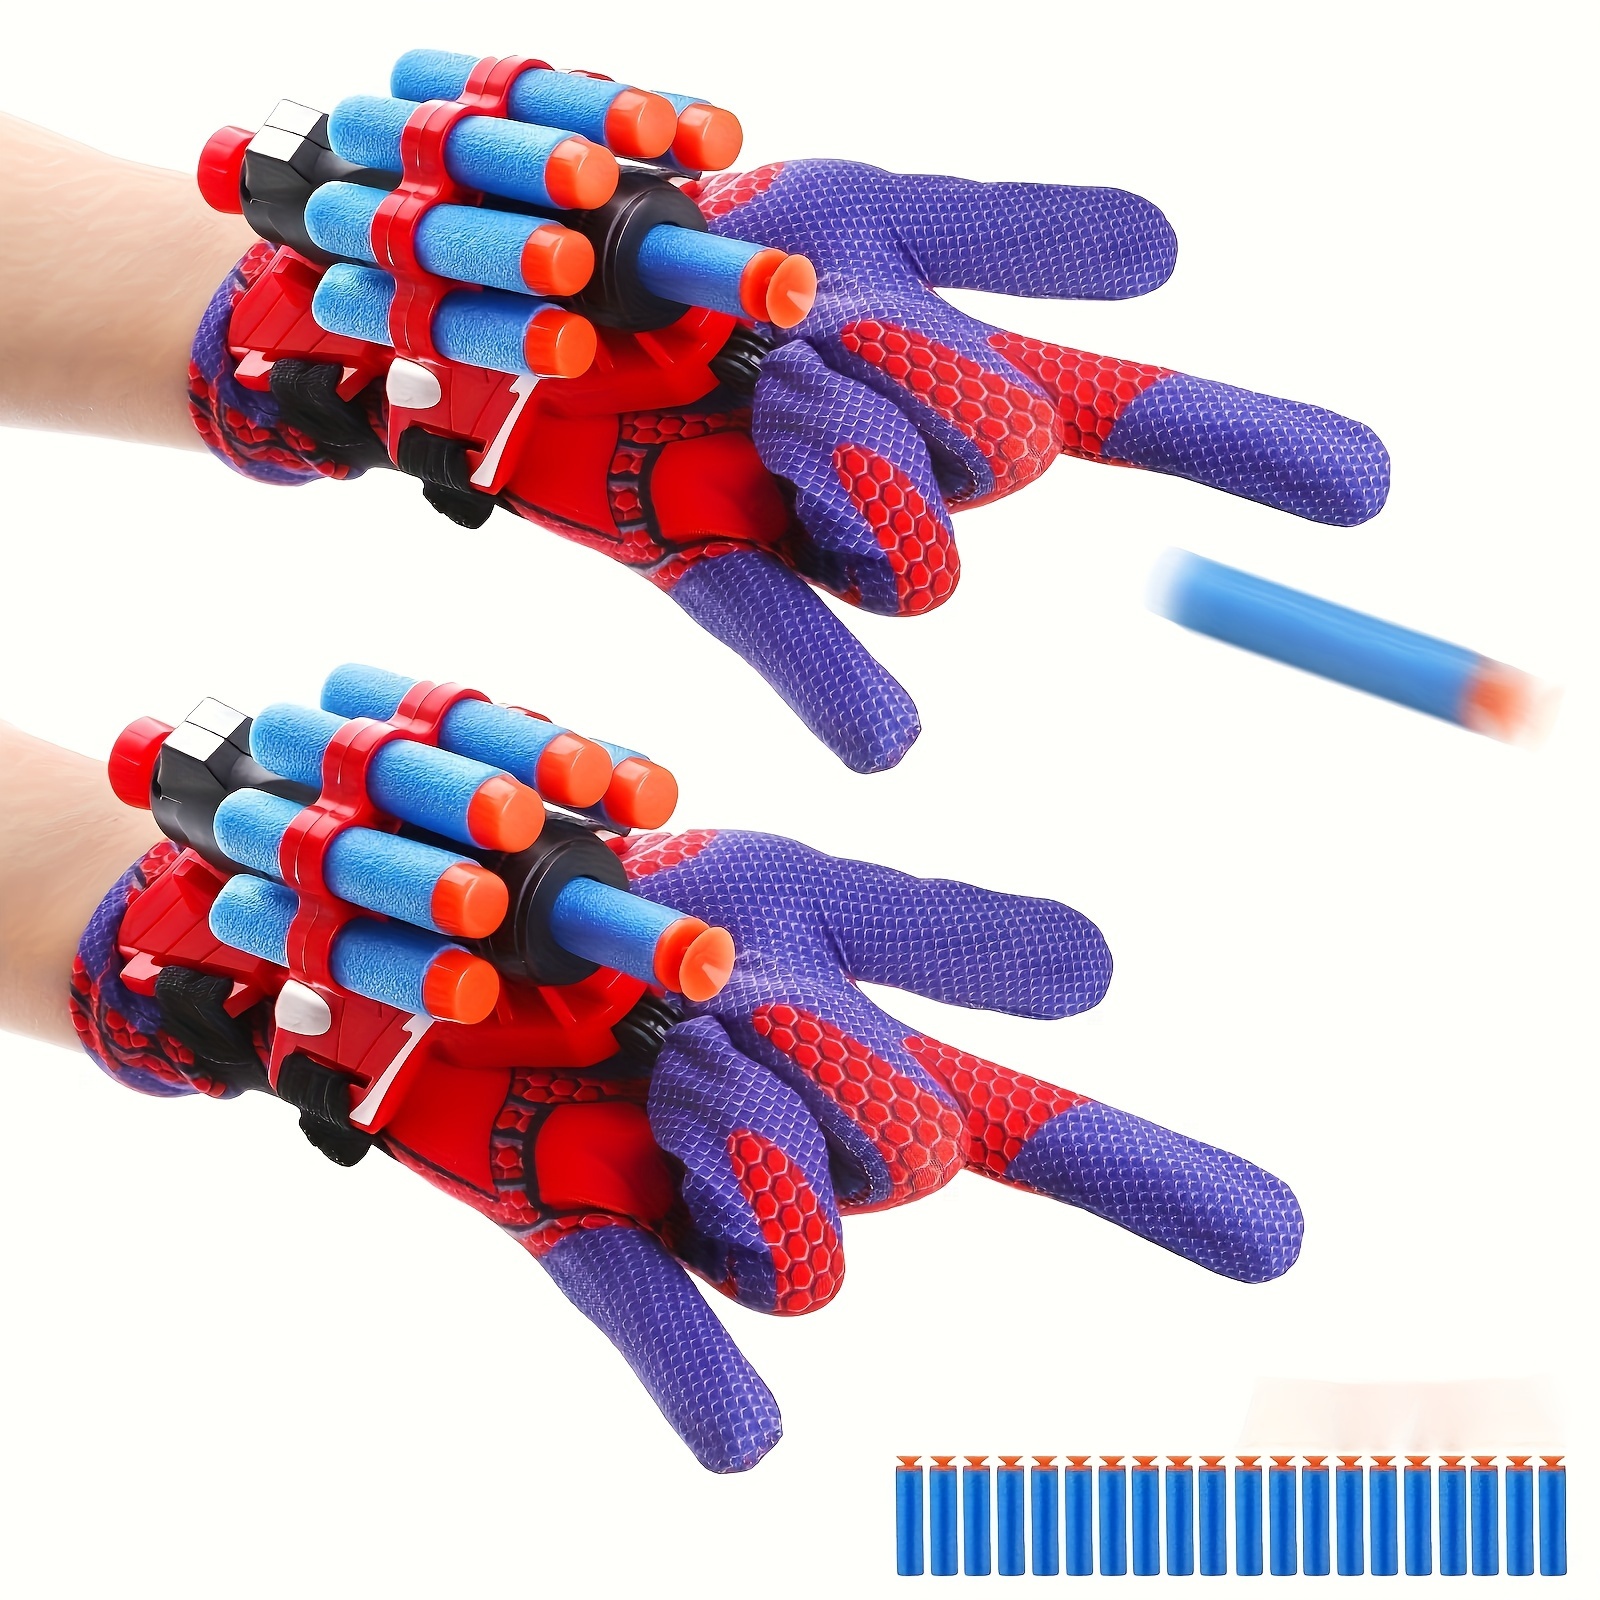 

Spider Web Shooter Toy Glove Set - Includes 2 Plastic Role-playing Launcher Gloves With Wrist Toys And 20 Small Arrows- Perfect For Children's Fun And Educational Decoration Gift